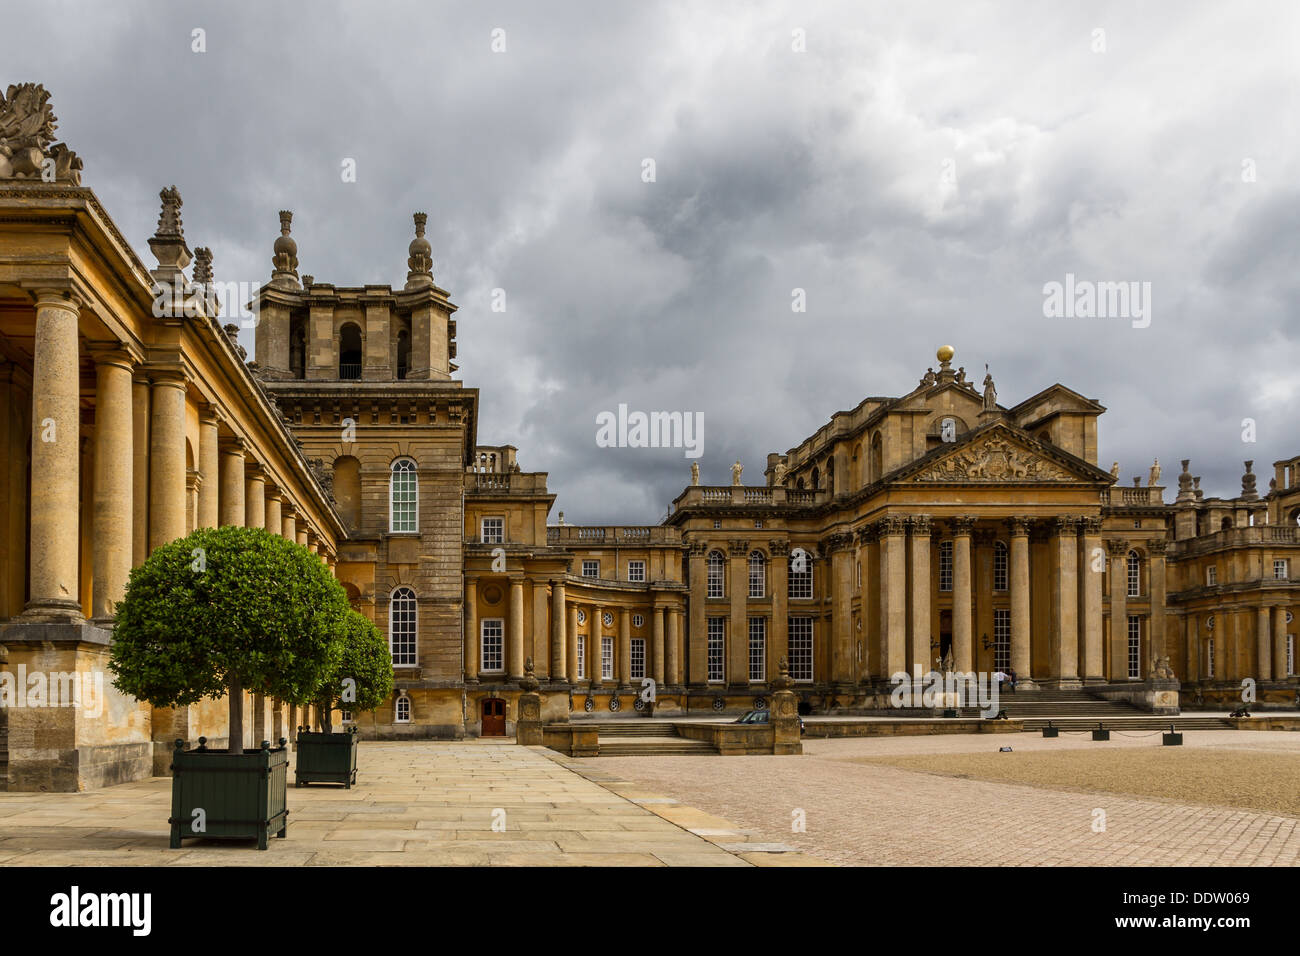 The Great Court at Blenheim Palace in Woodstock, Oxfordshire, England Stock Photo